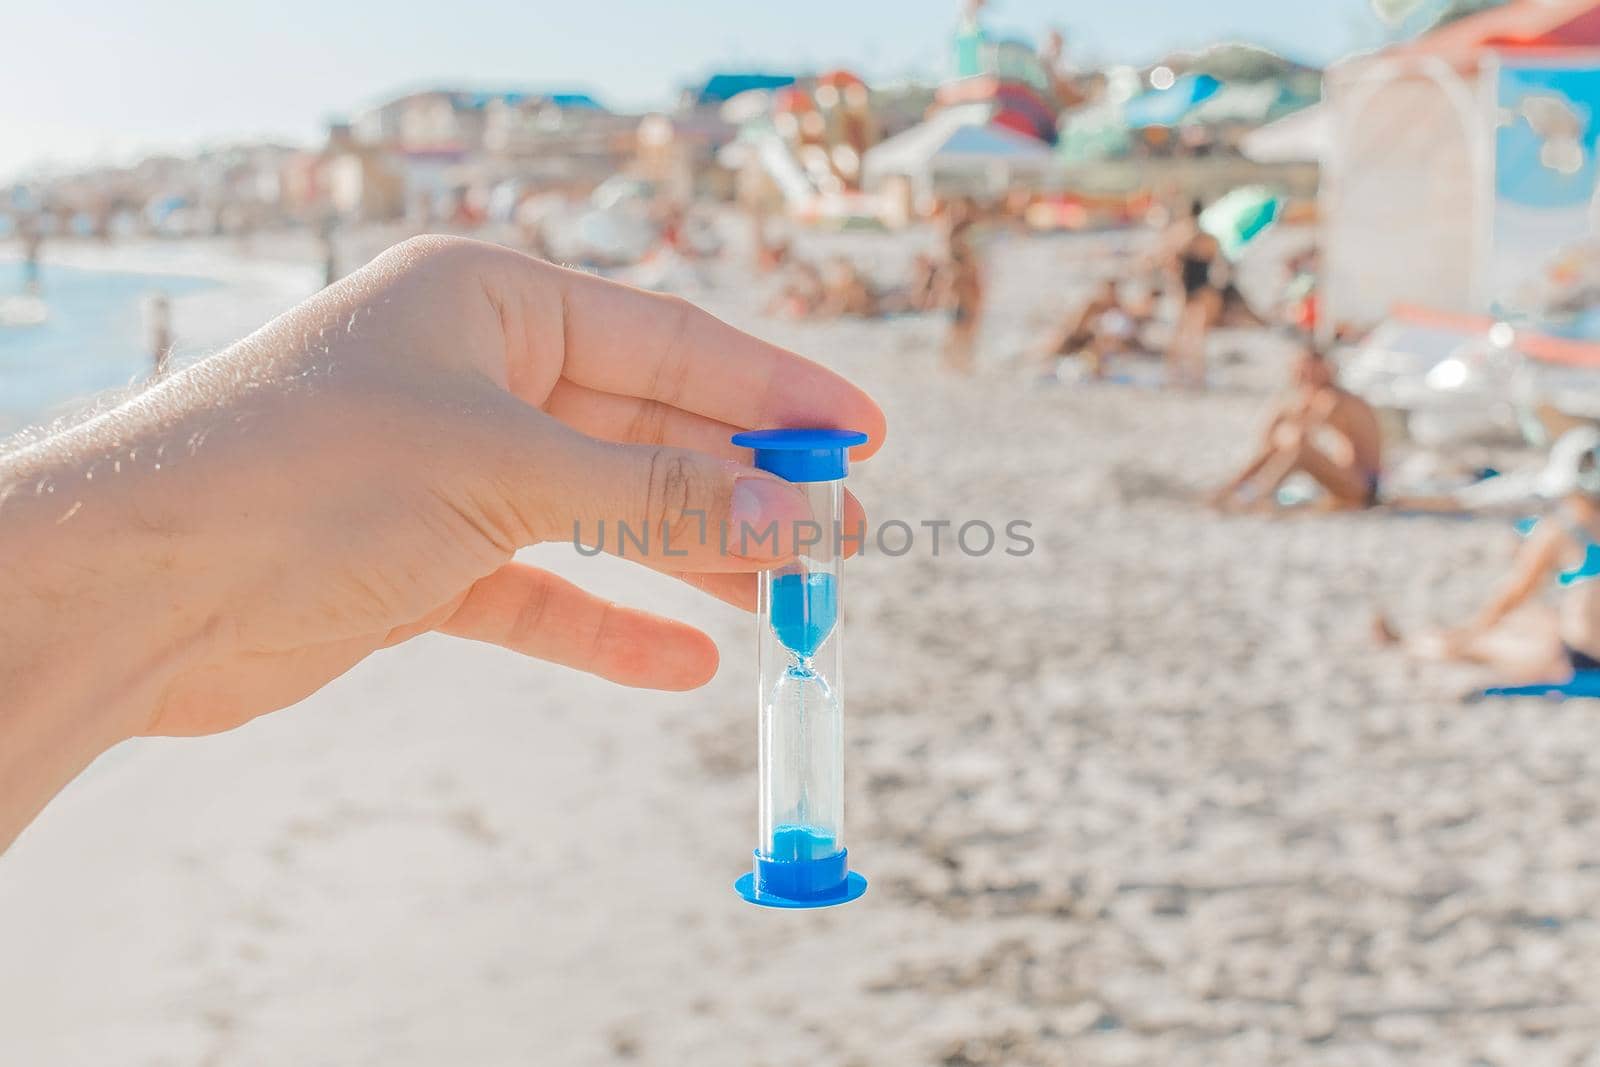 The guy's hand holds an hourglass against the backdrop of a sea beach with holidaymakers in the resort area, close up.